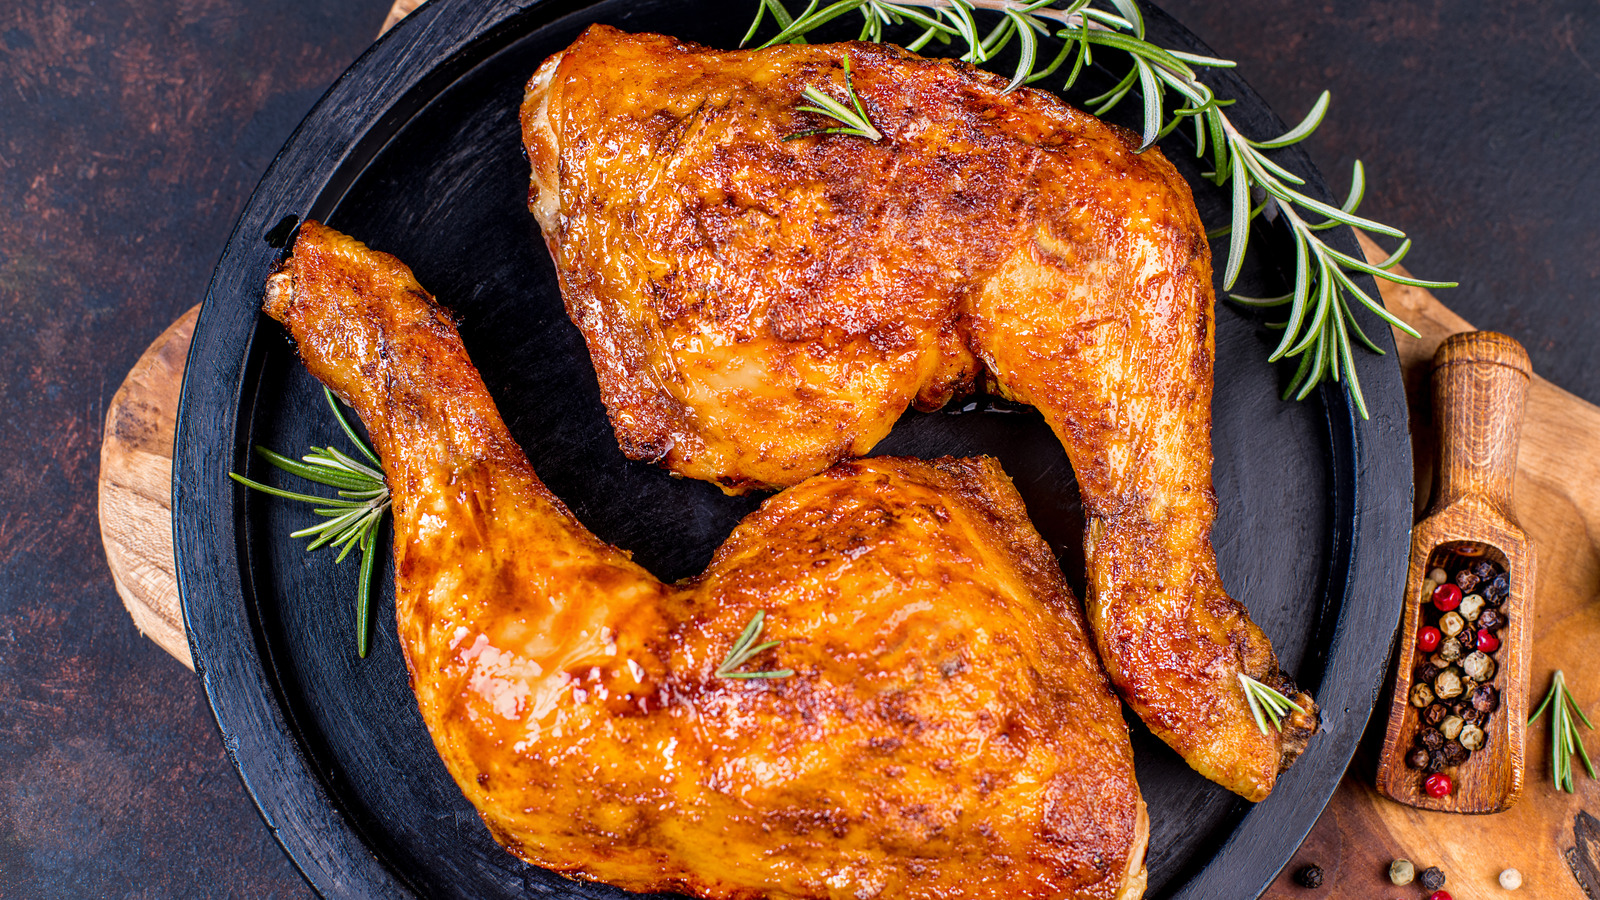 New Study Reveals How You Can Wash Chicken Safely